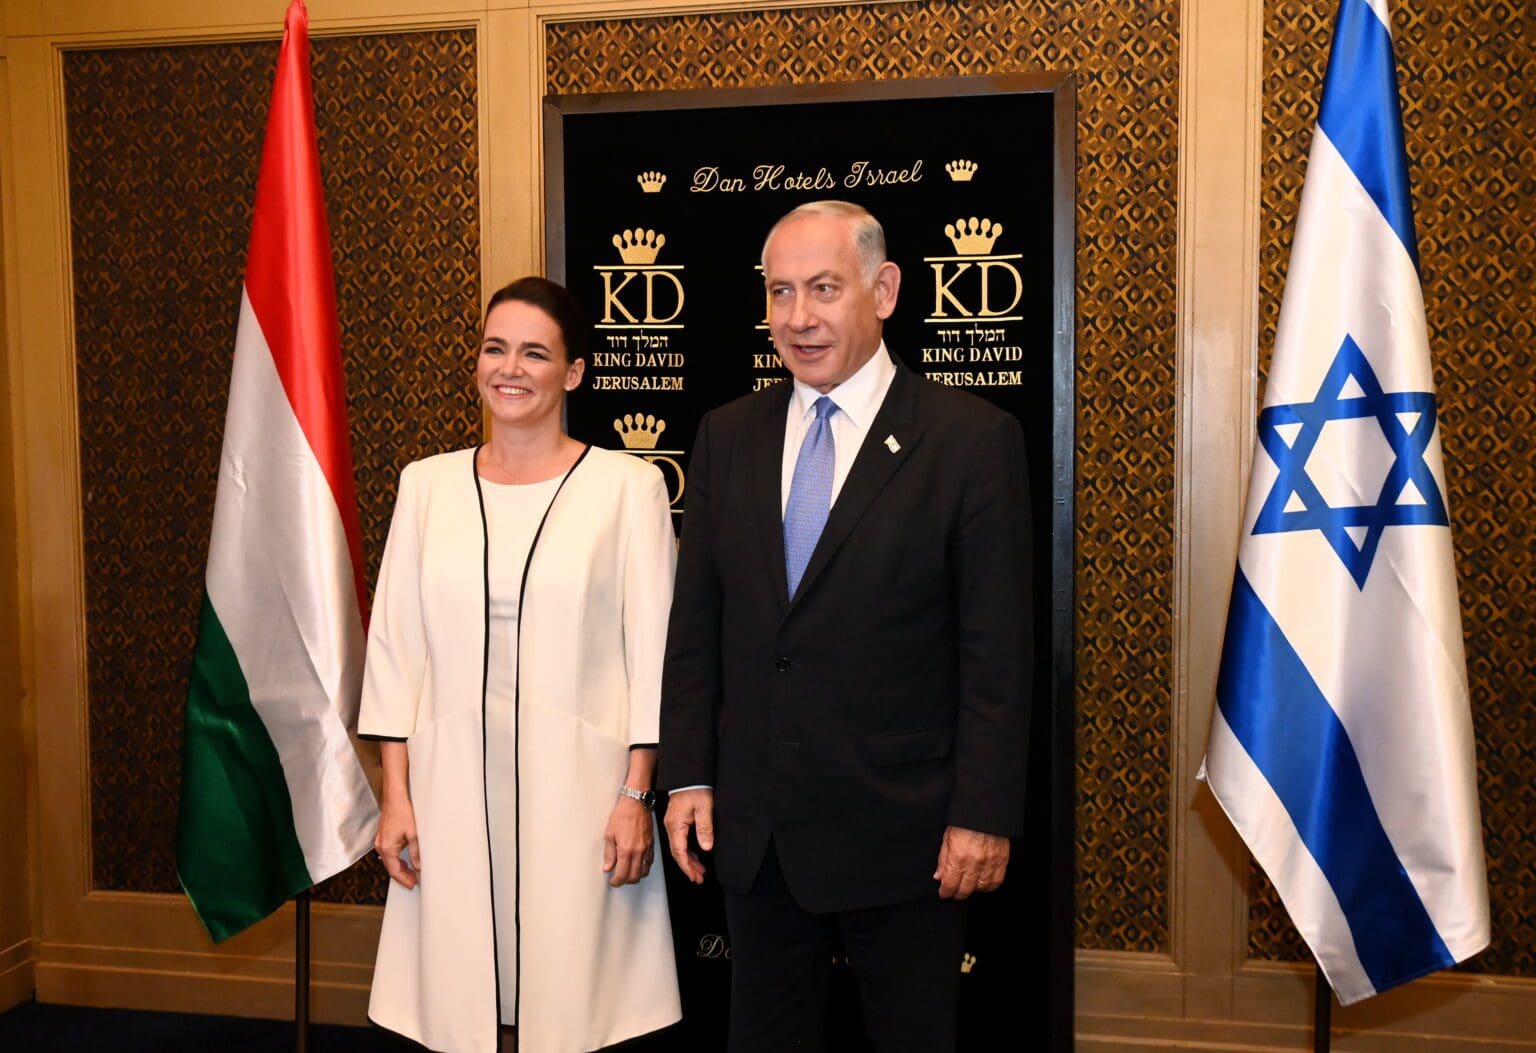 President Katalin Novák: ‘The Alliance of Hungary and Israel is Unshakeable’